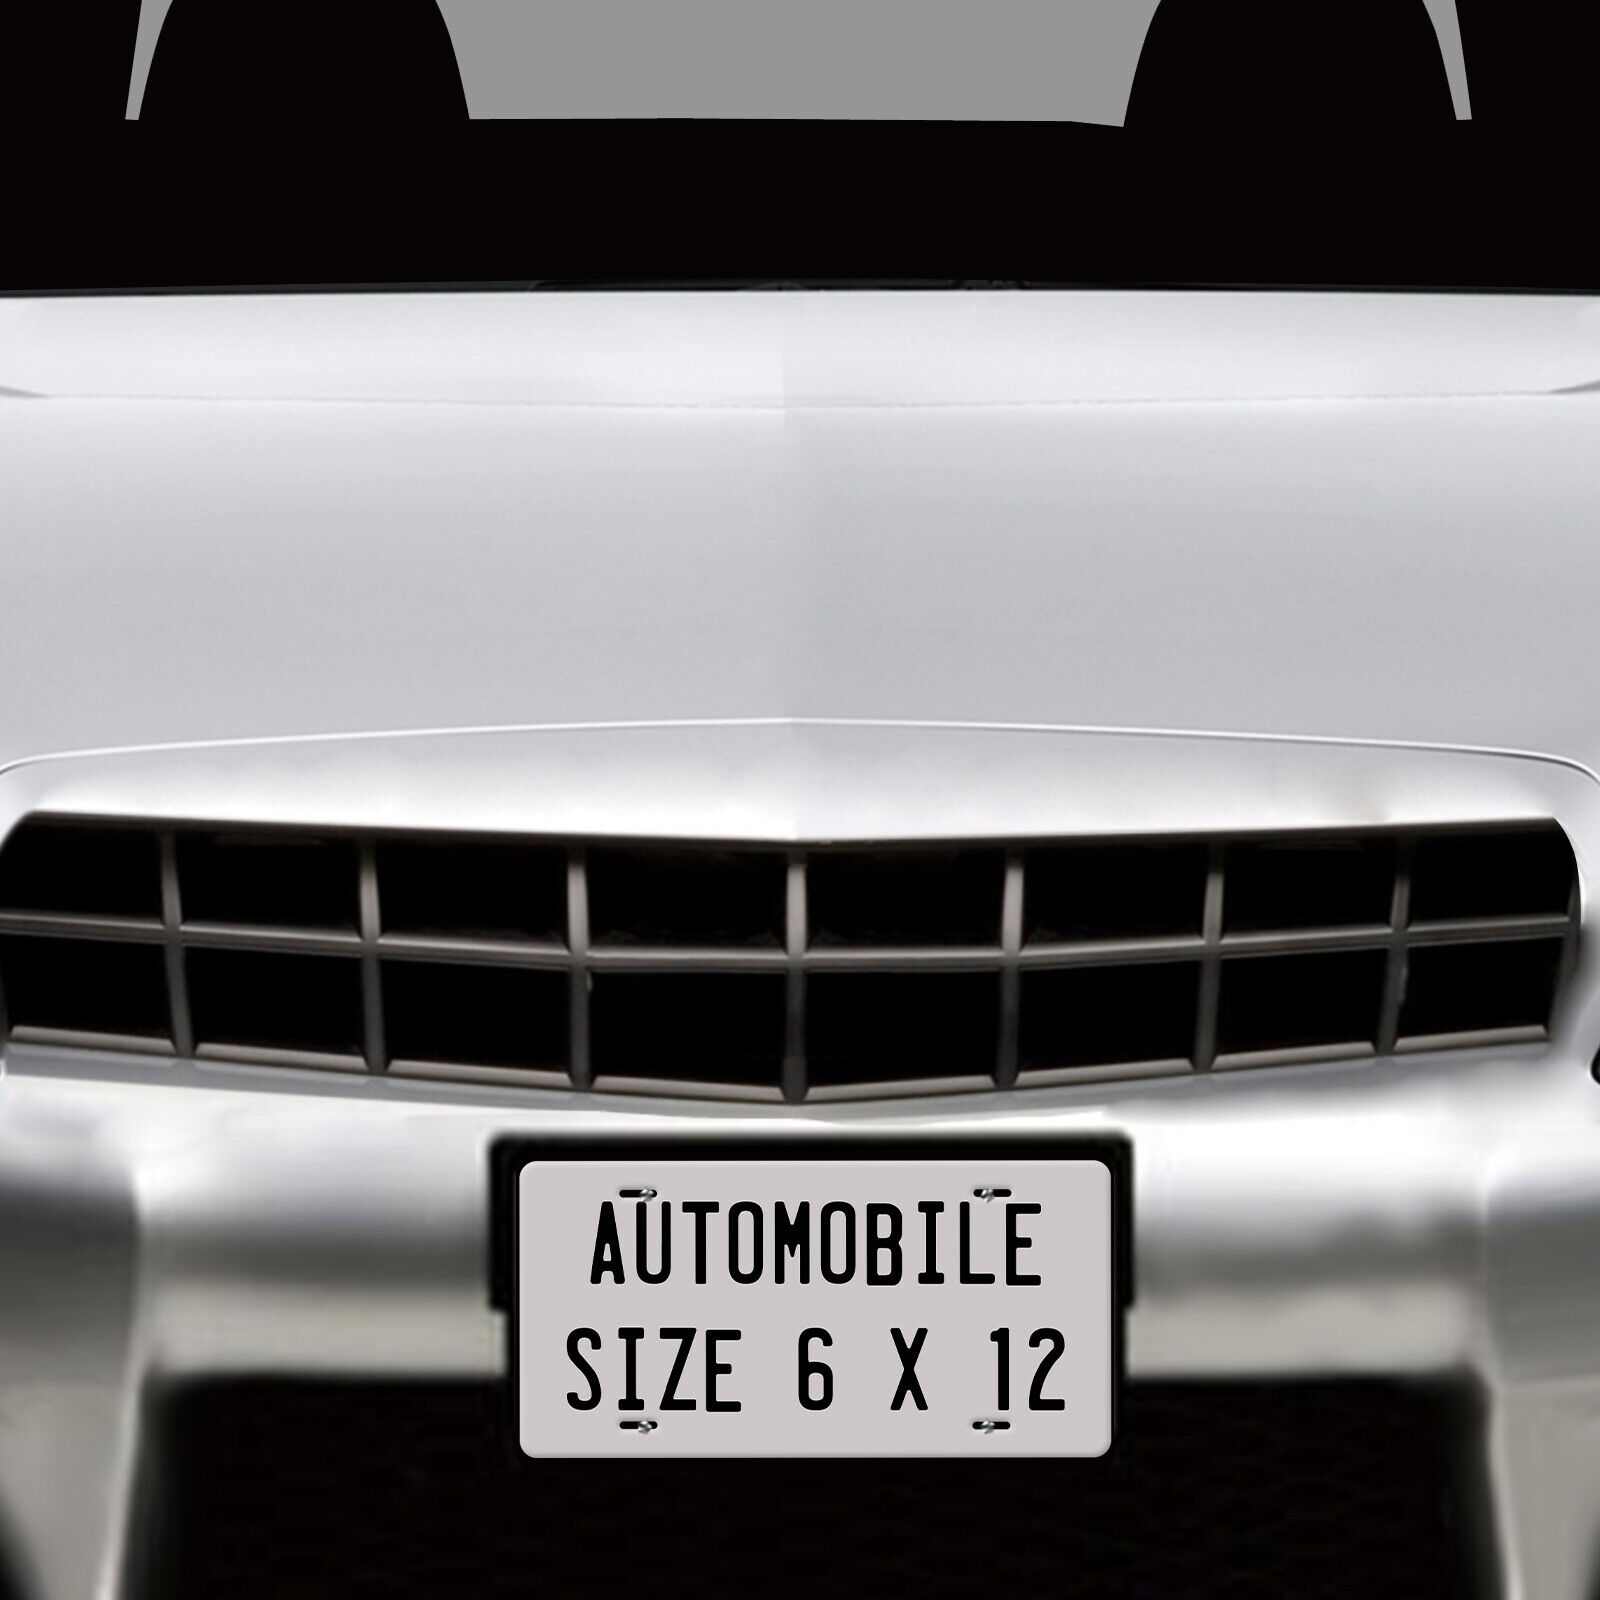 Any State Black and White Personalized Novelty Auto Car License Plate ATV Bike